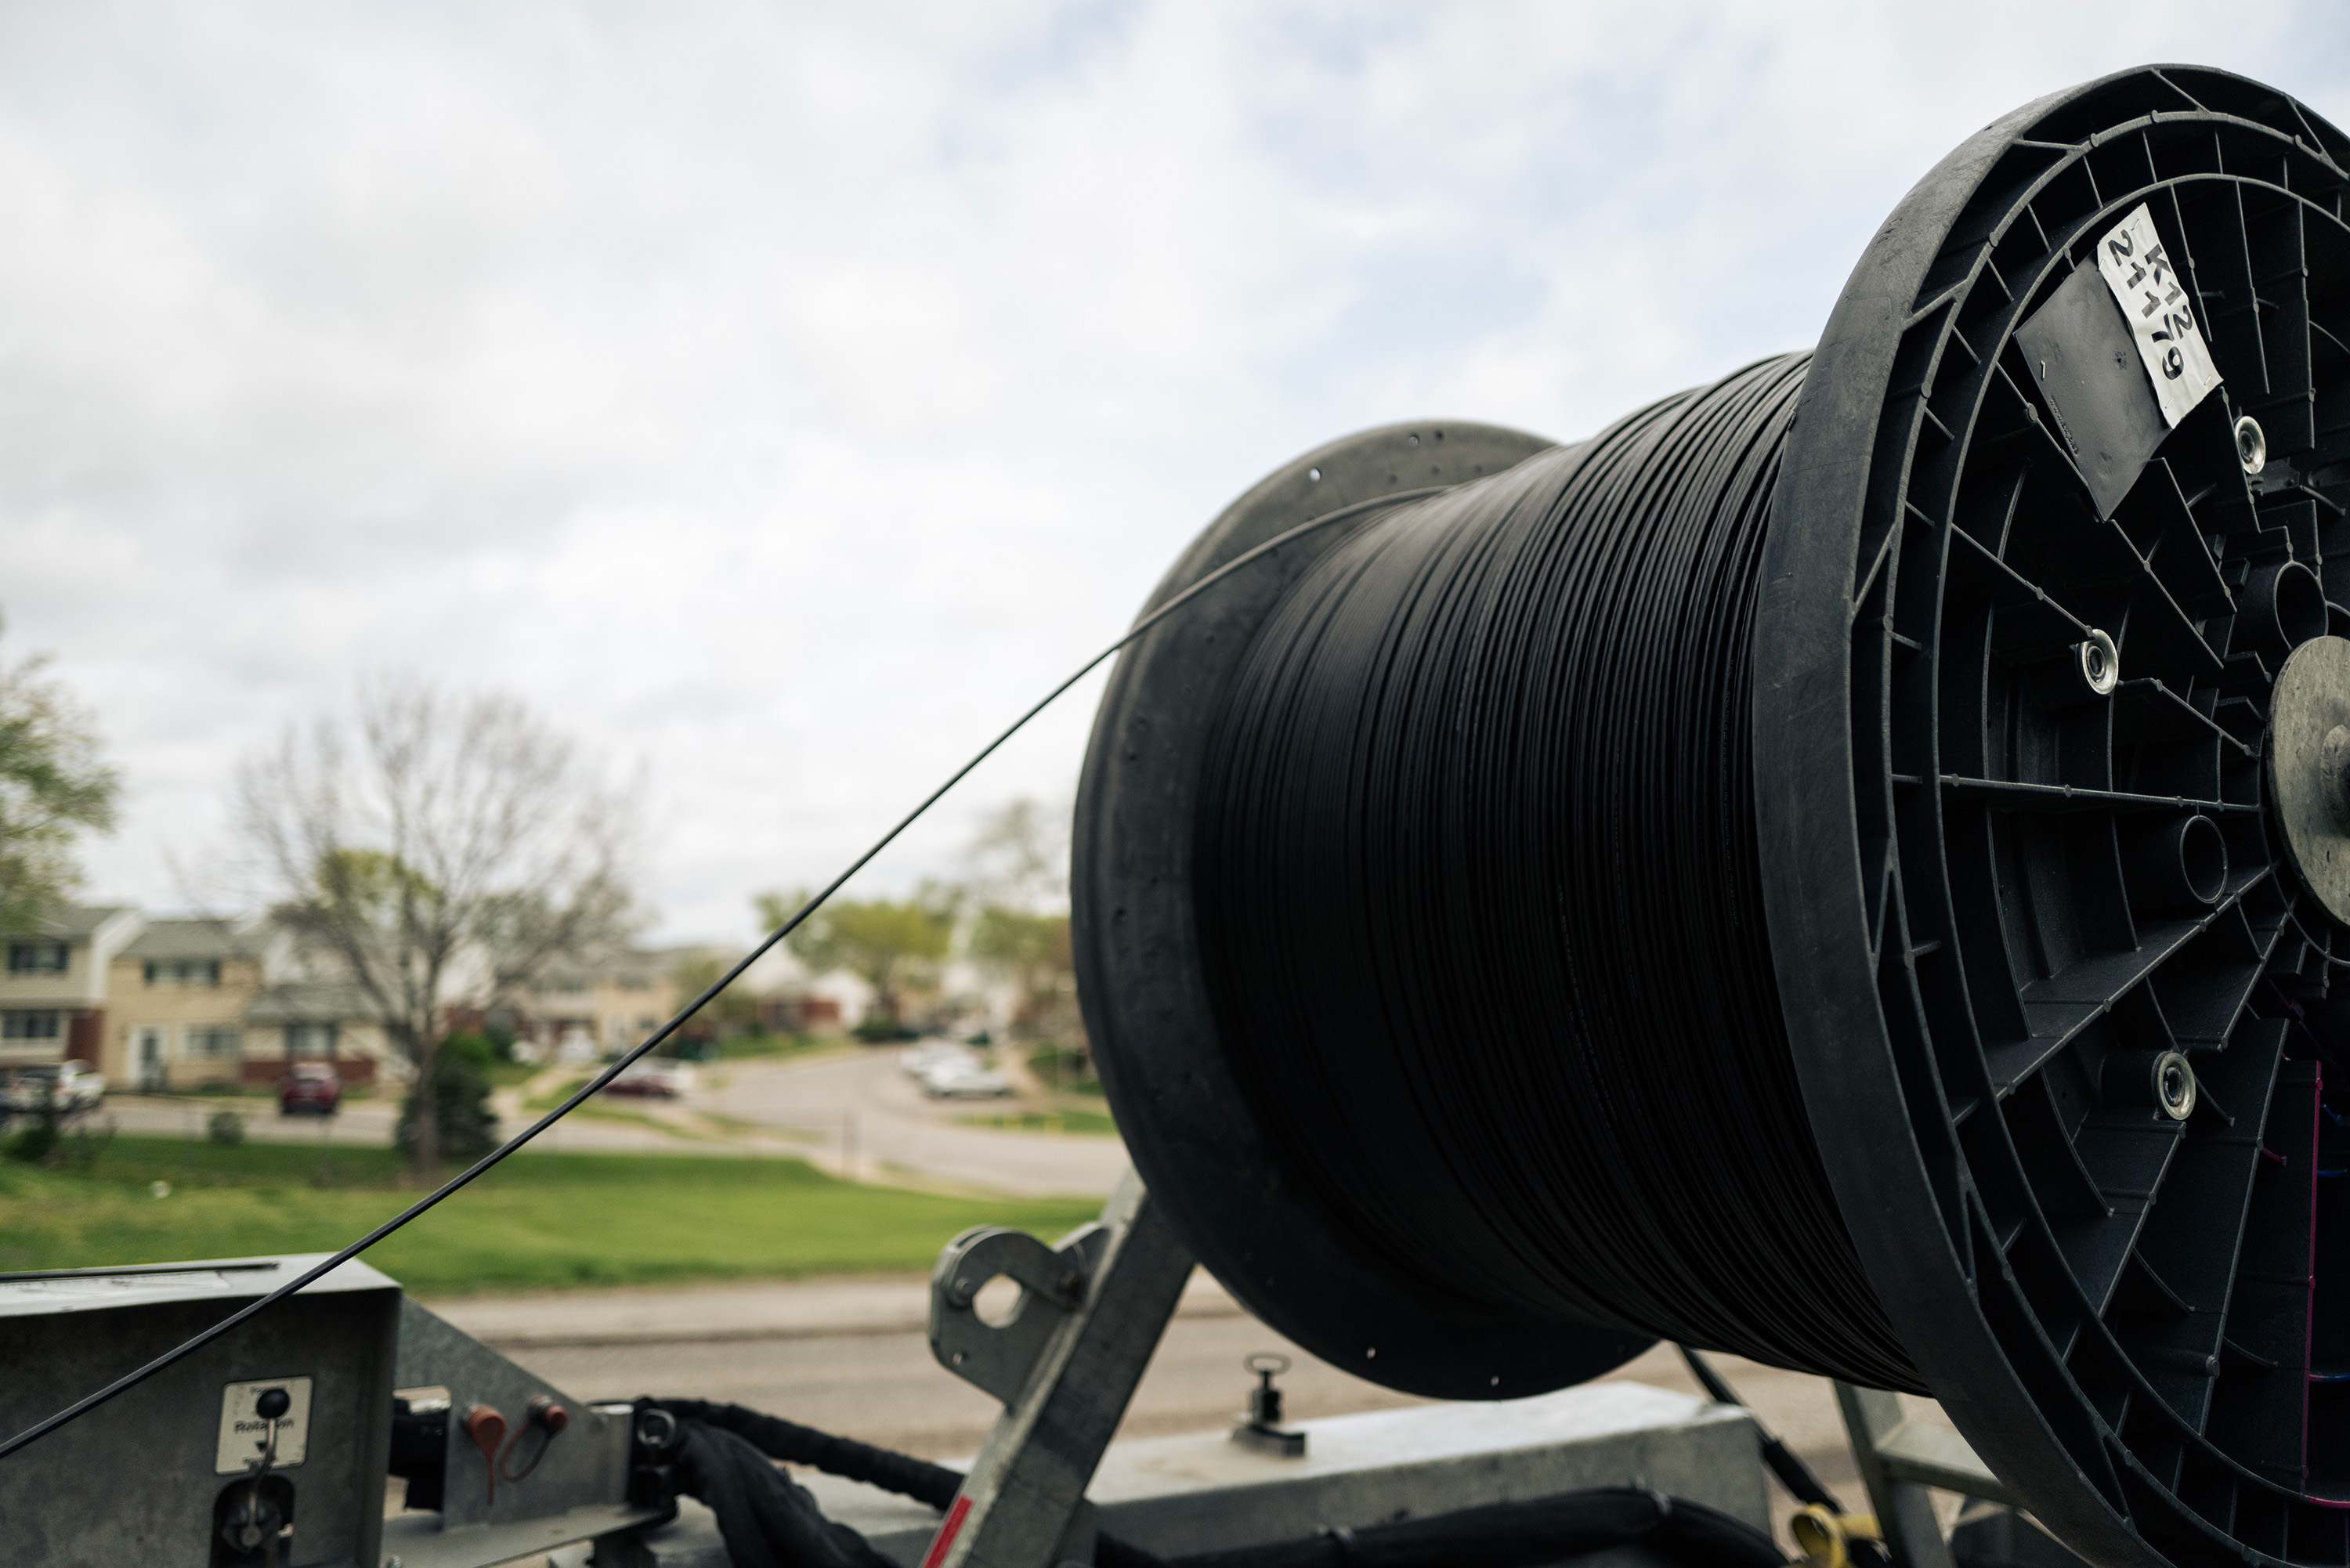 A large spool of black fiber optic cable on a trailer in a suburban neighborhood under a cloudy sky, suggesting ongoing work.